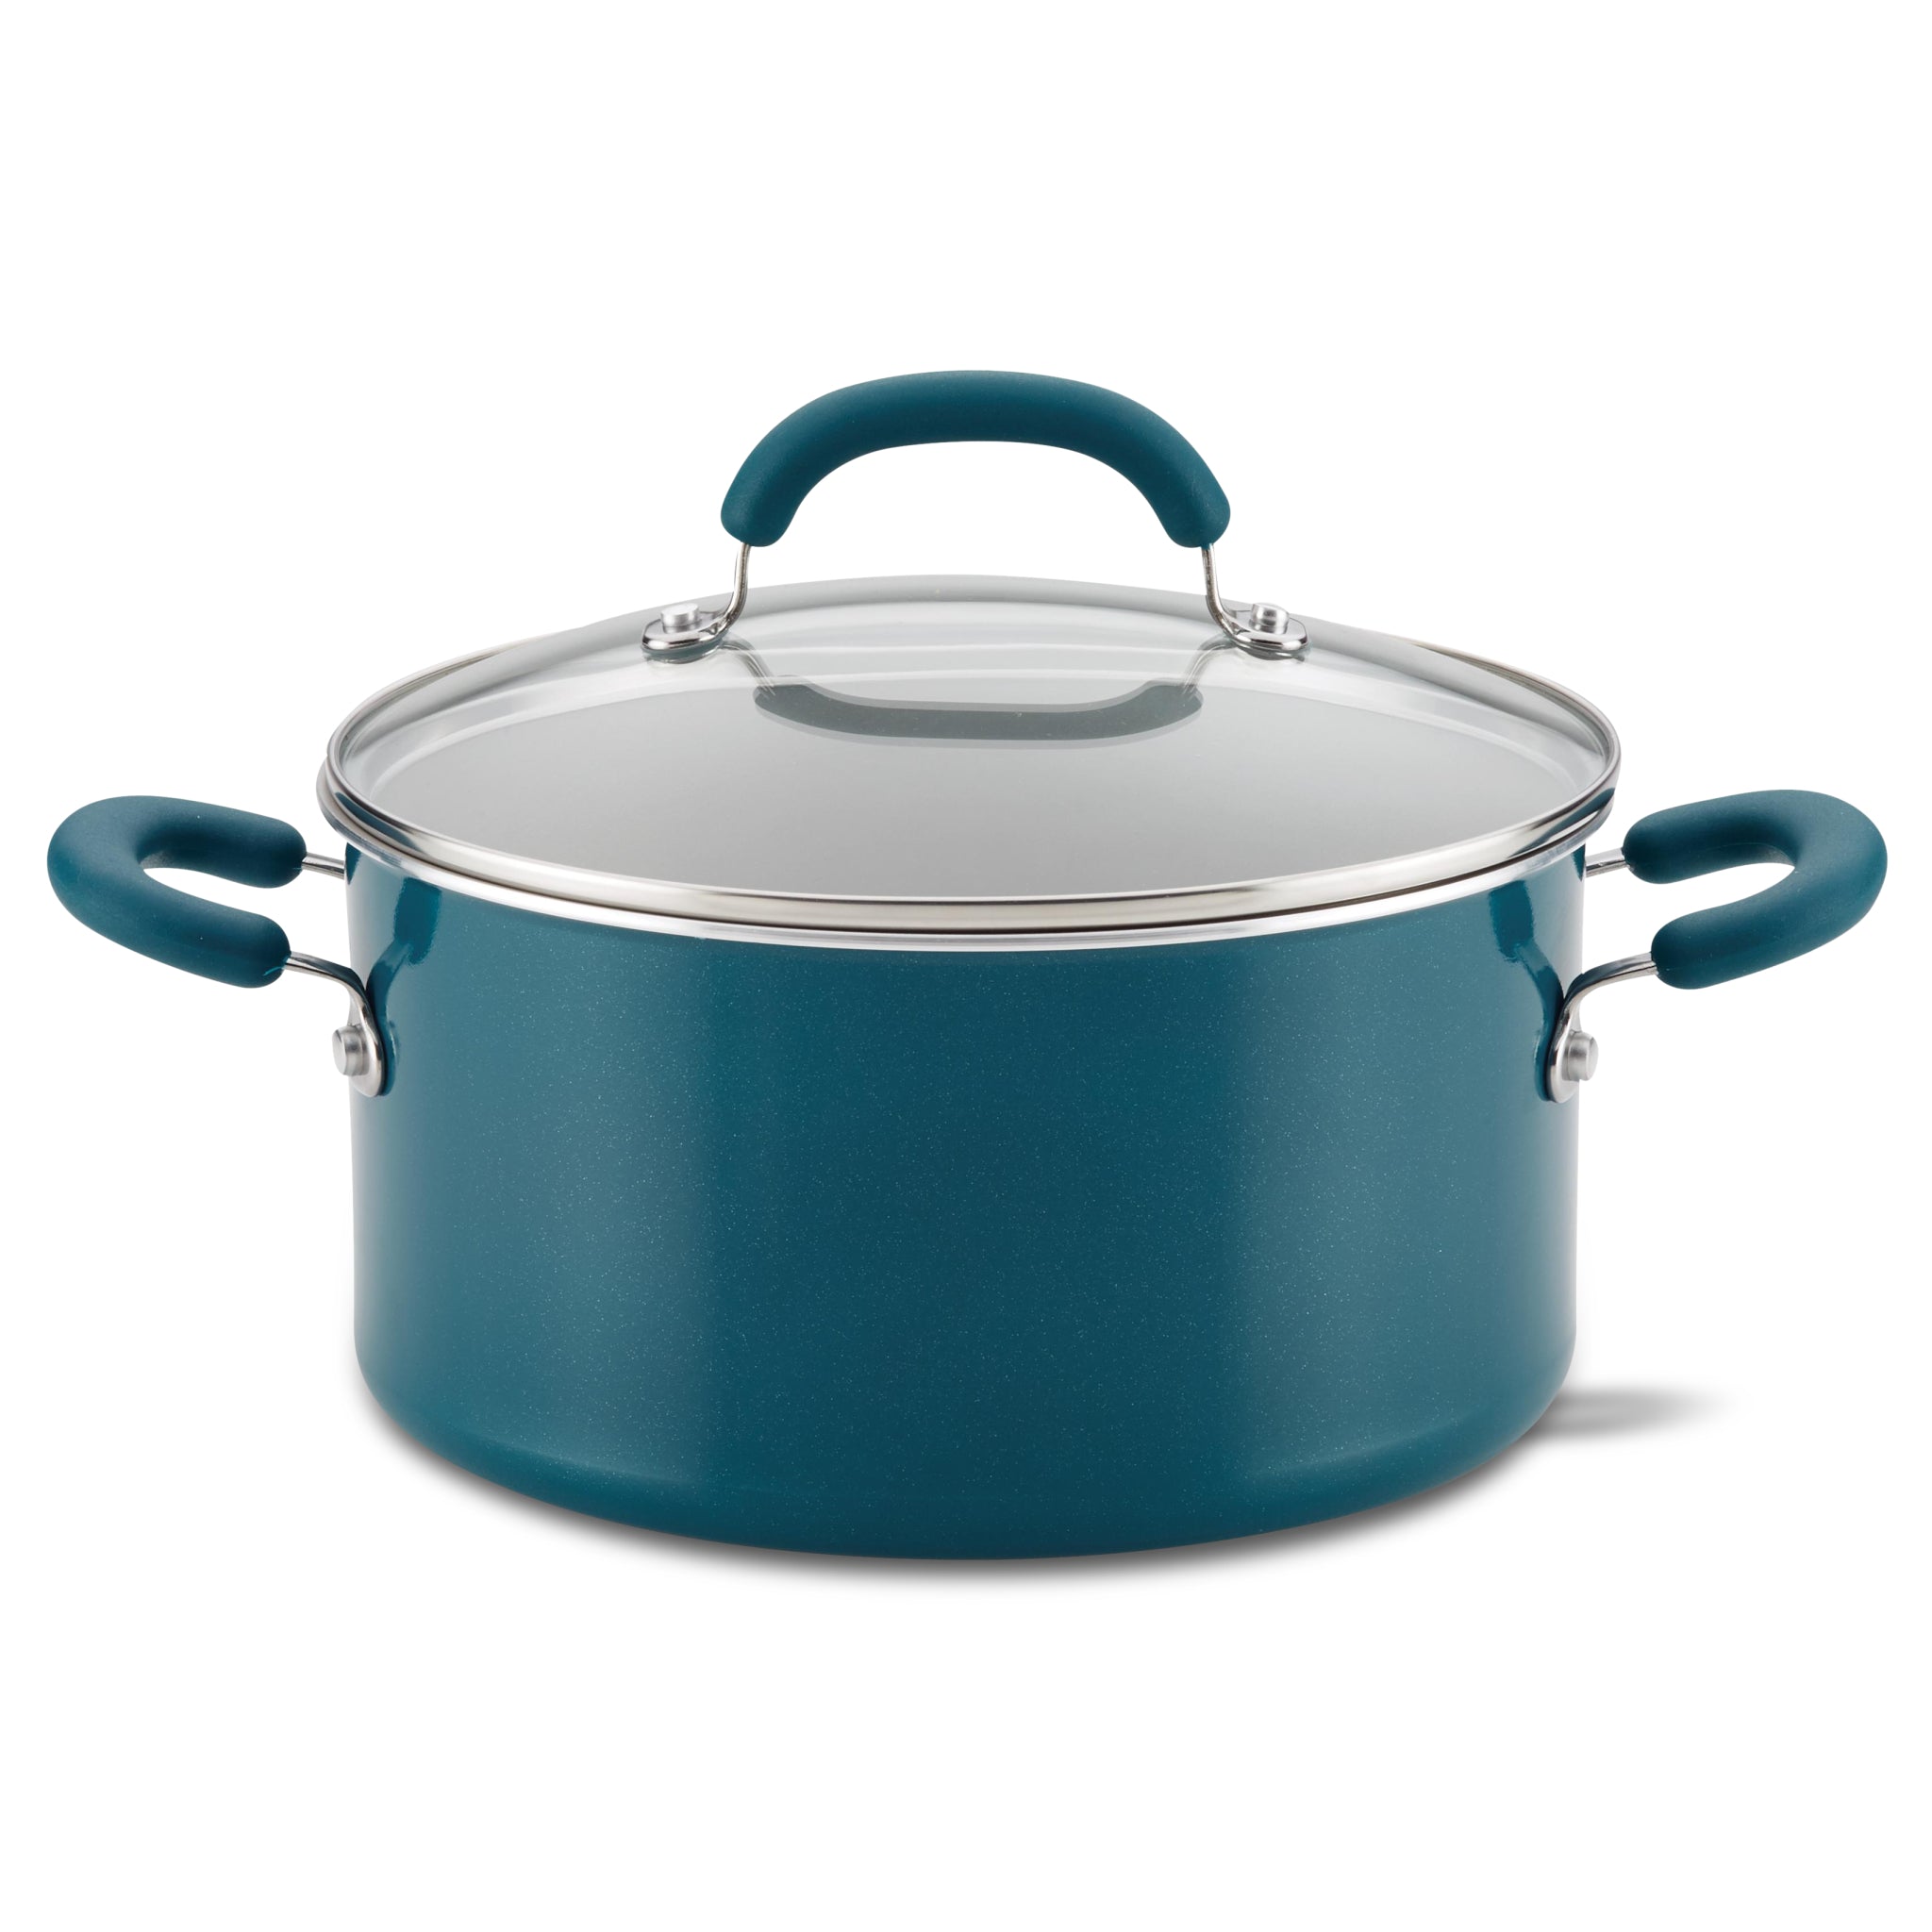 6-Quart Nonstick Induction Covered Stockpot